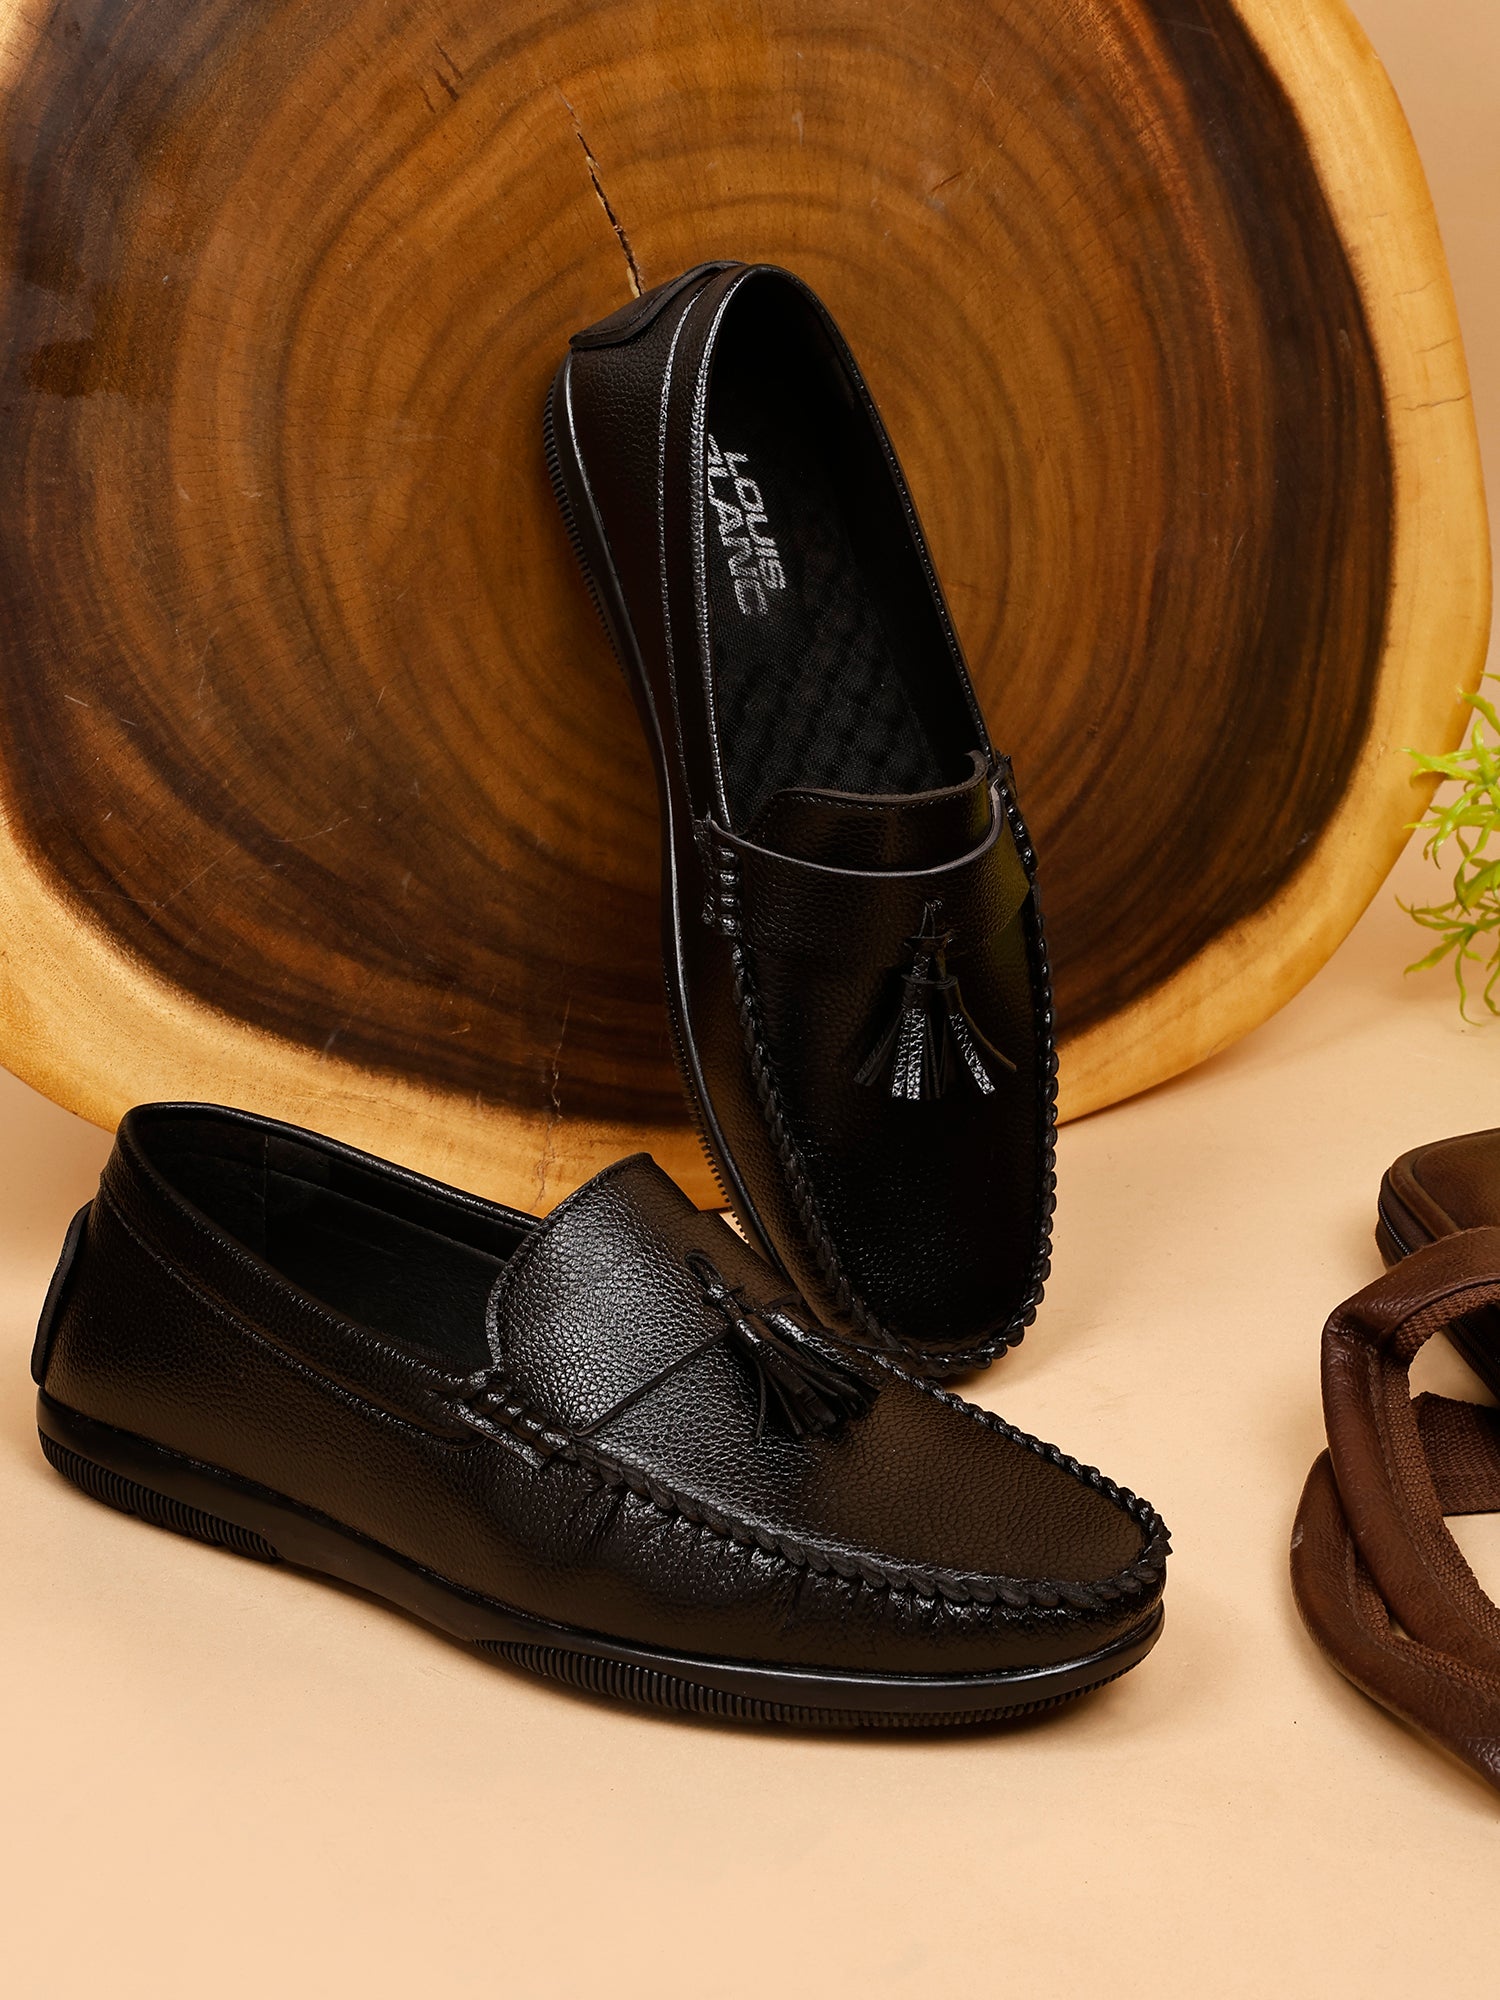 LB 47 Obesidian Black Slip On Style Loafer Most Comfortable Doctor Insole With Wrinkle Free Fox Leather Loafers.